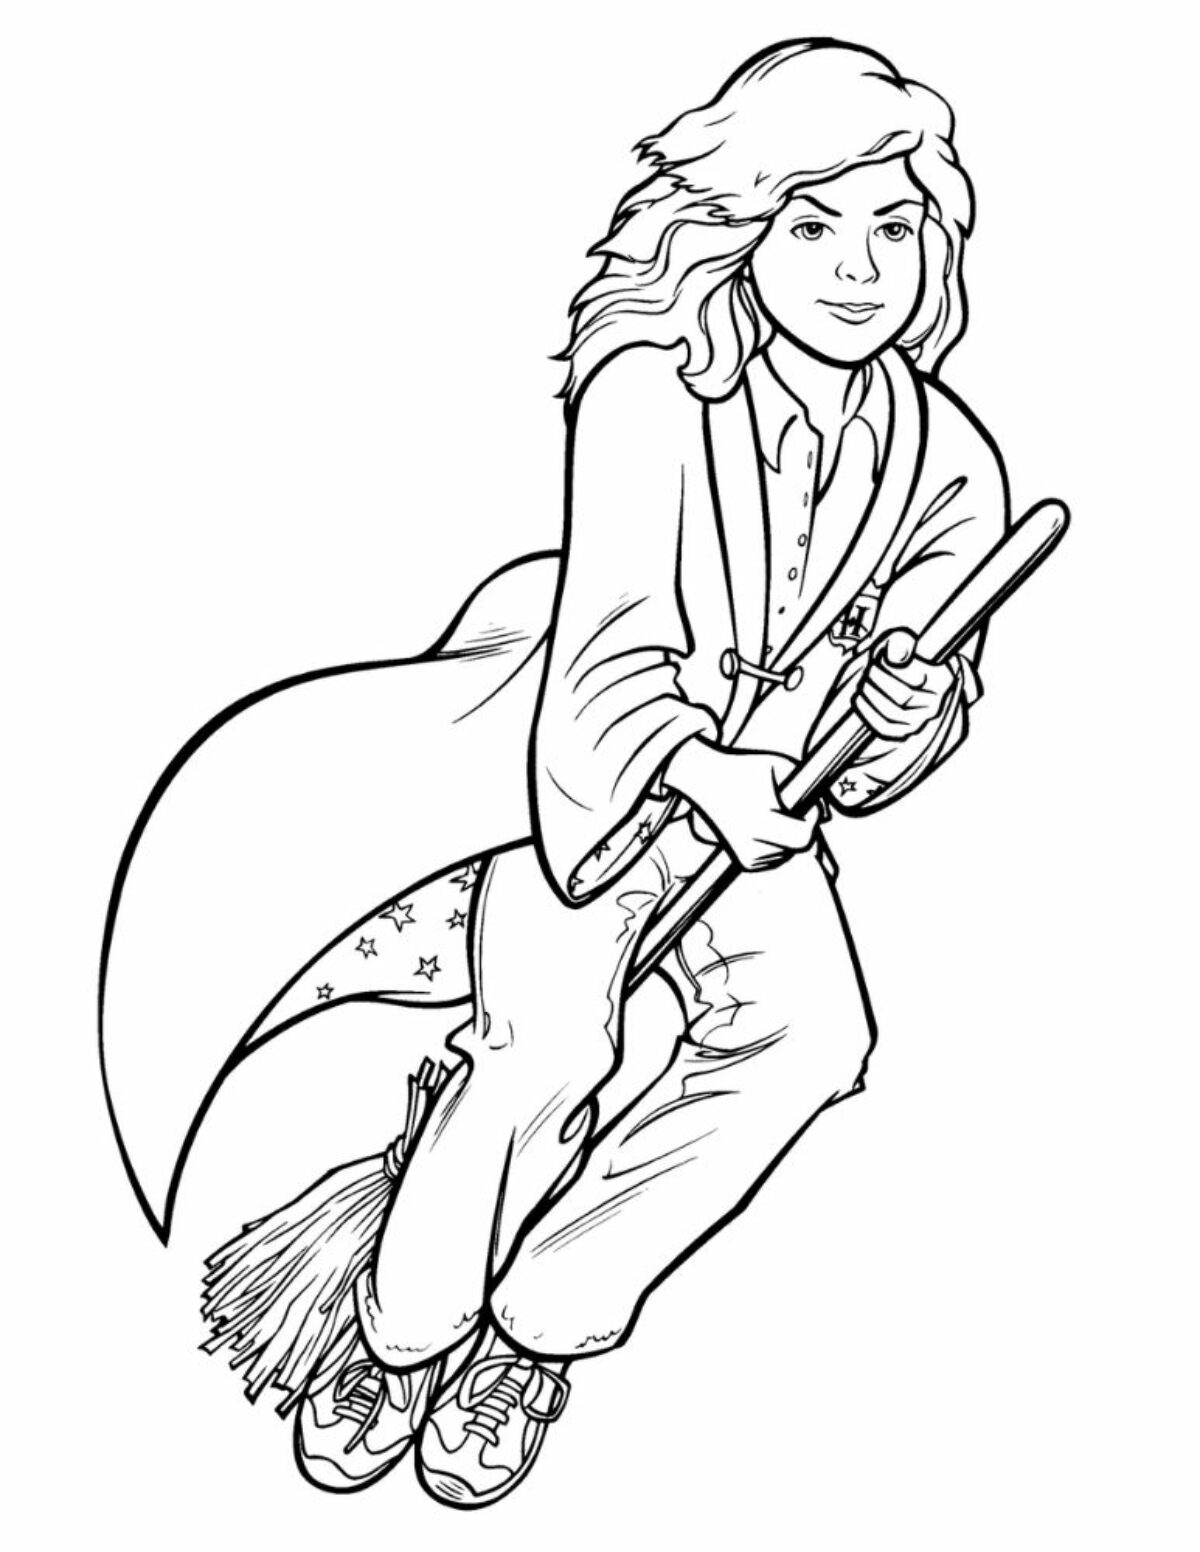 Hermione granger coloring pages free